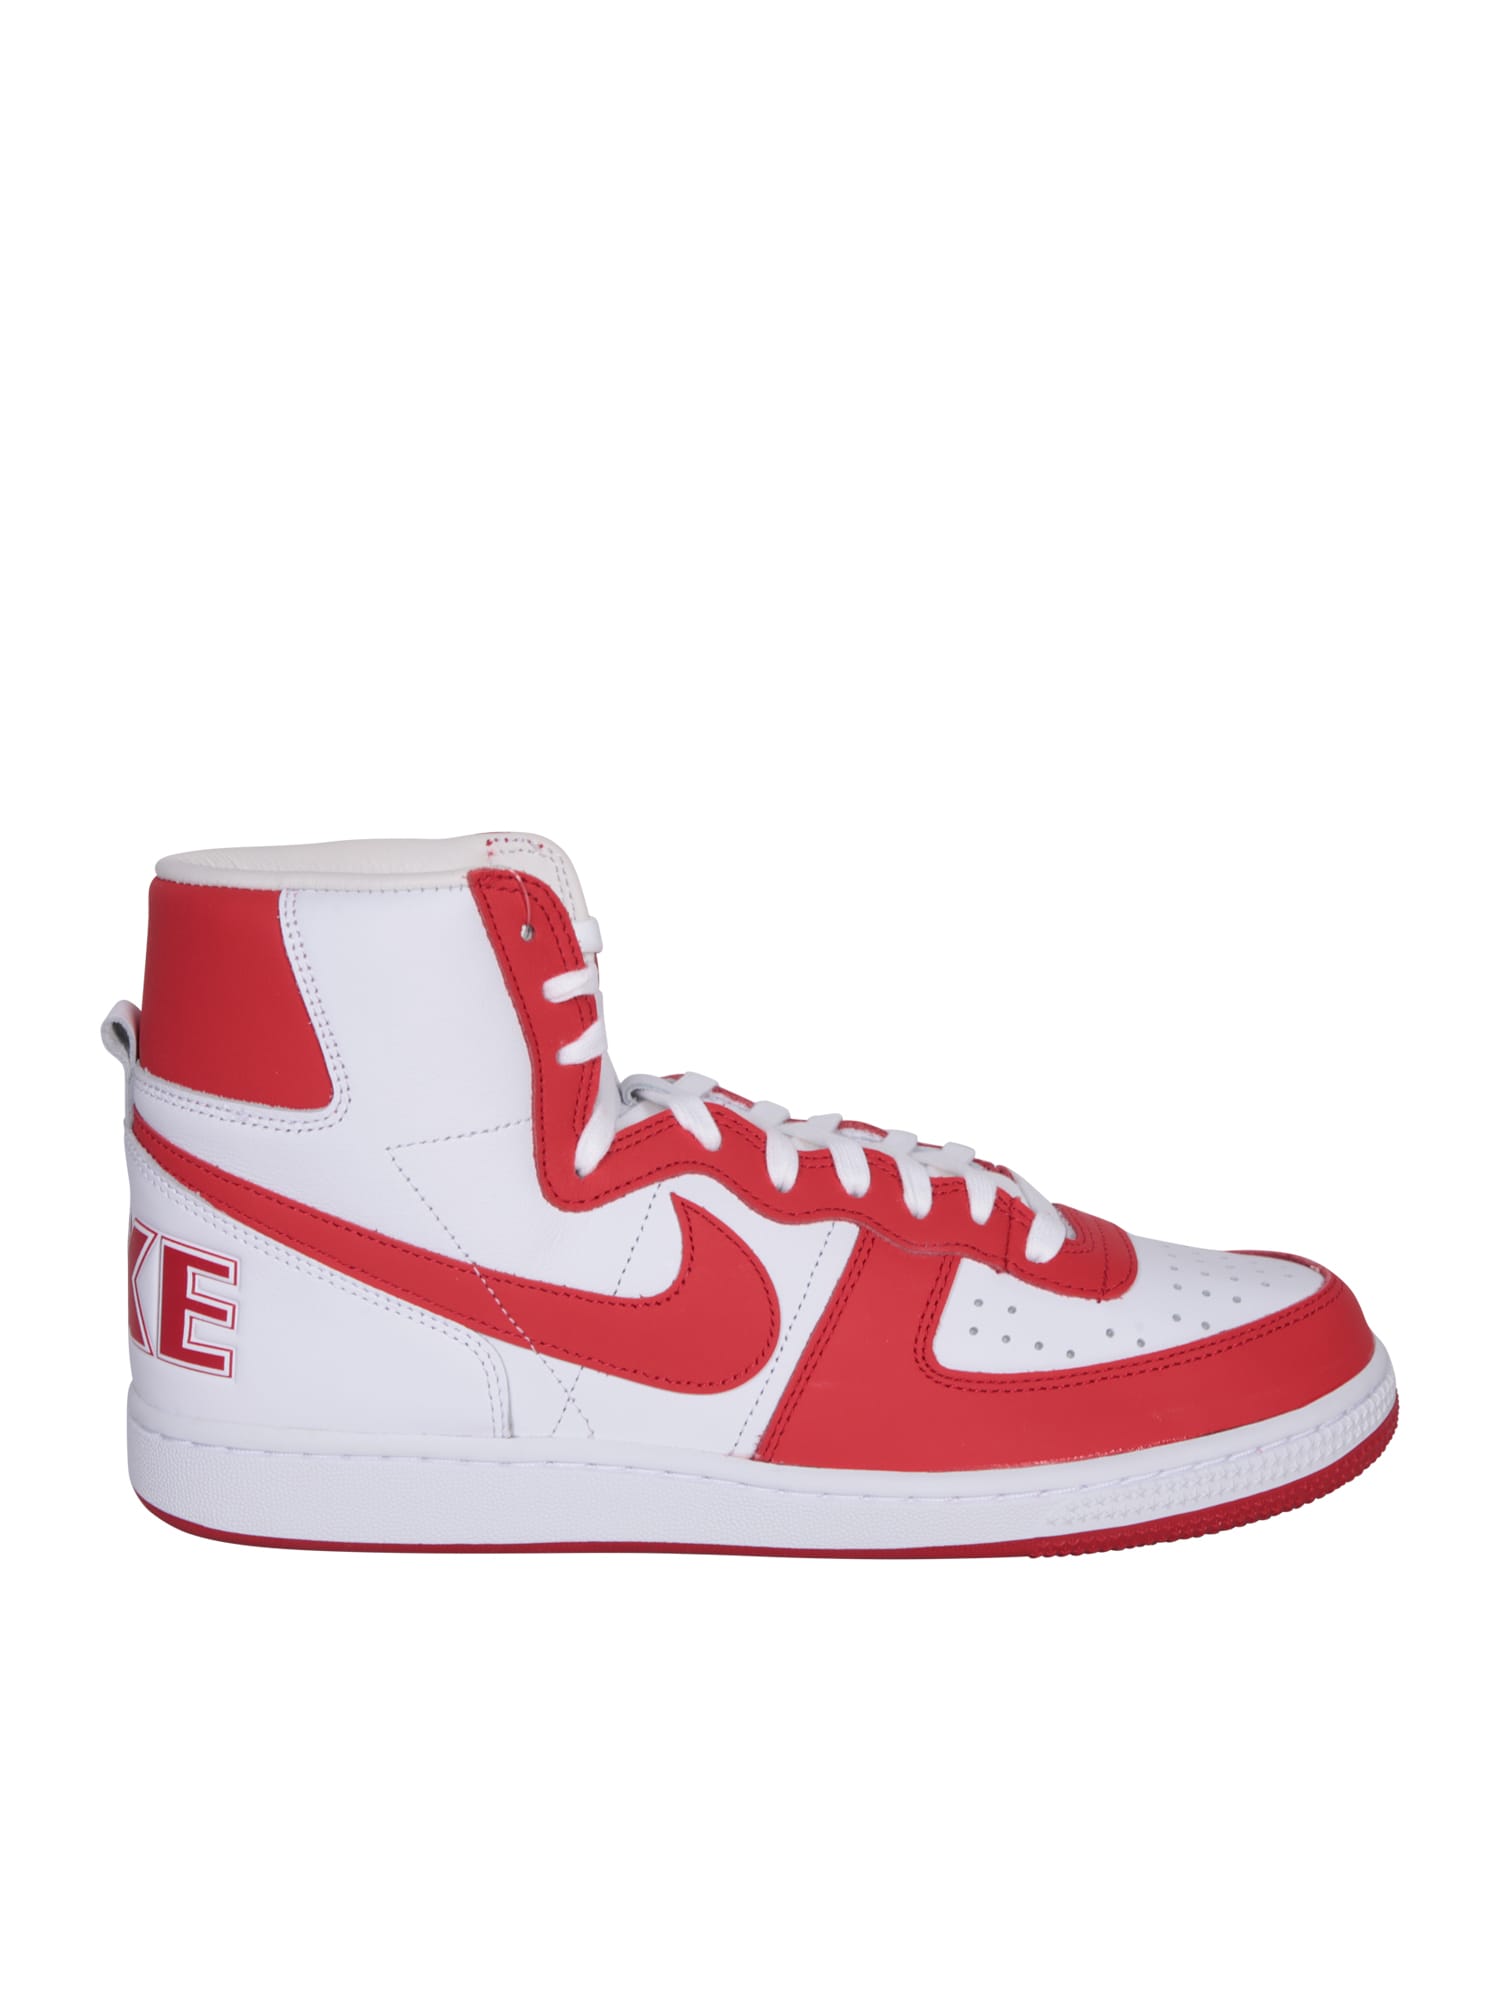 Comme Des Garçons Homme Deux Trainers High-top Nike Terminator Red/white